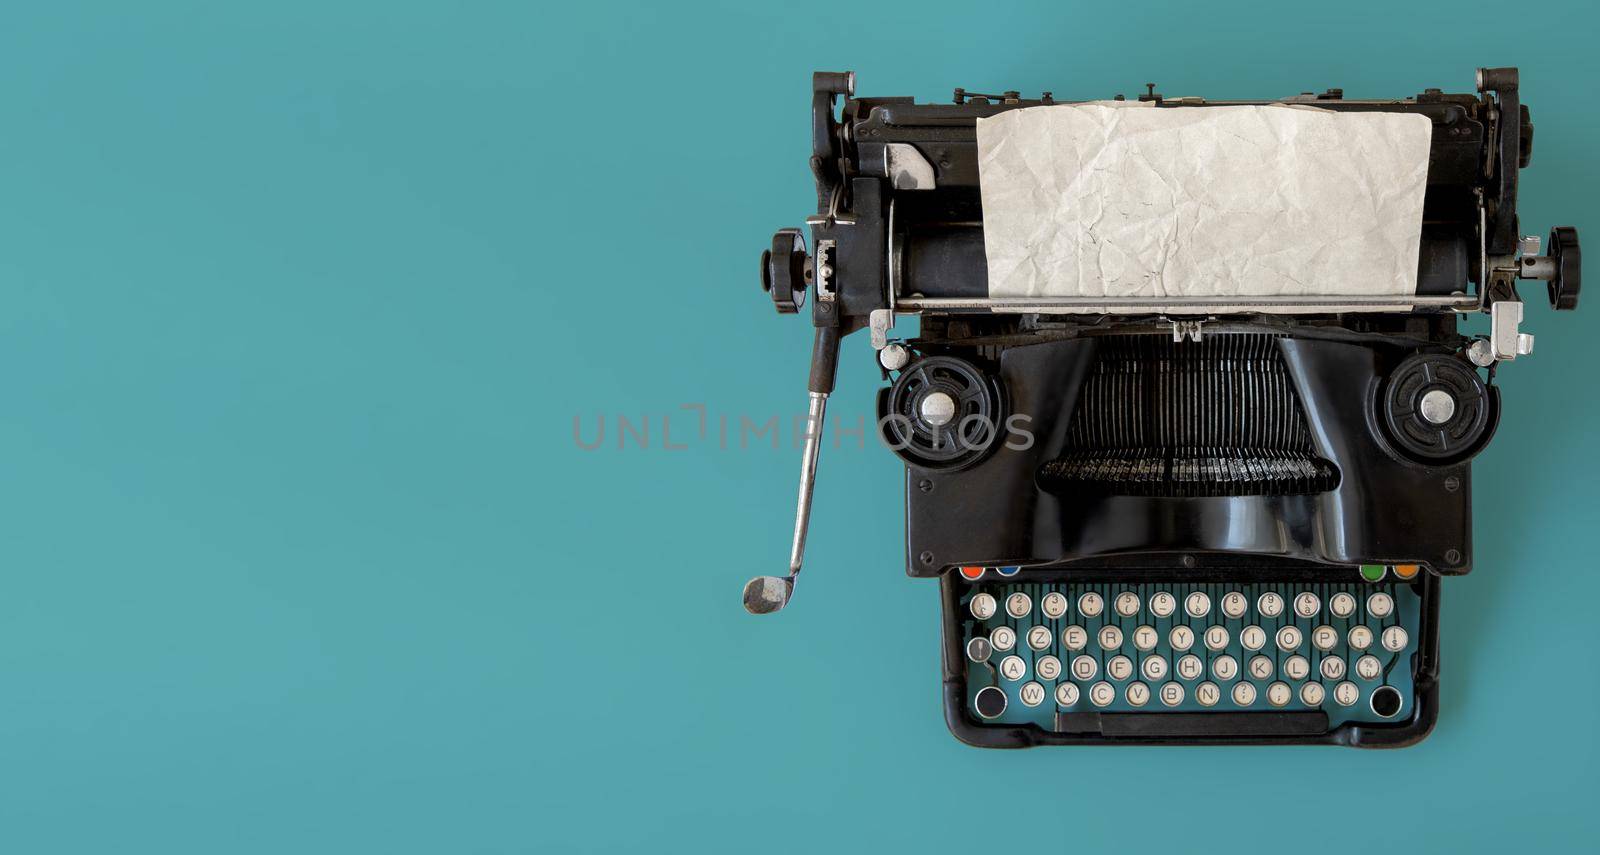 A vintage typewriter on blue background. by maramade